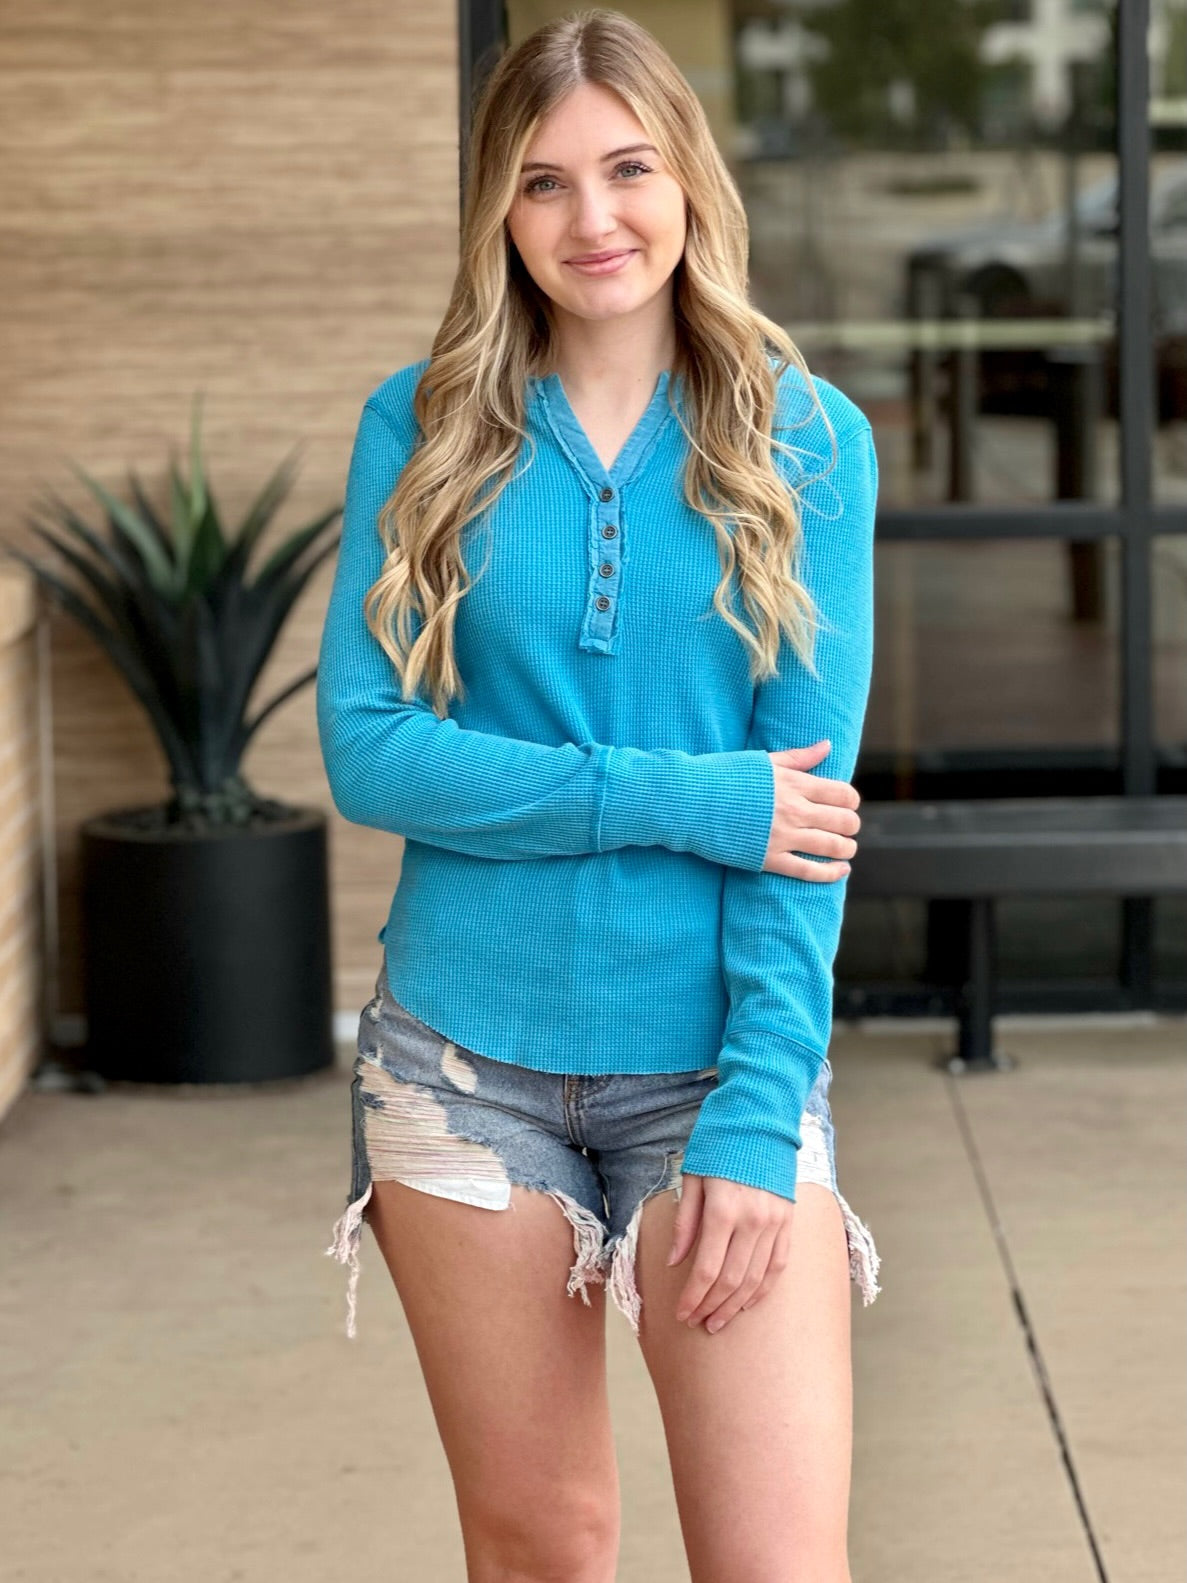 Lexi in turquoise henley front view hand on arm